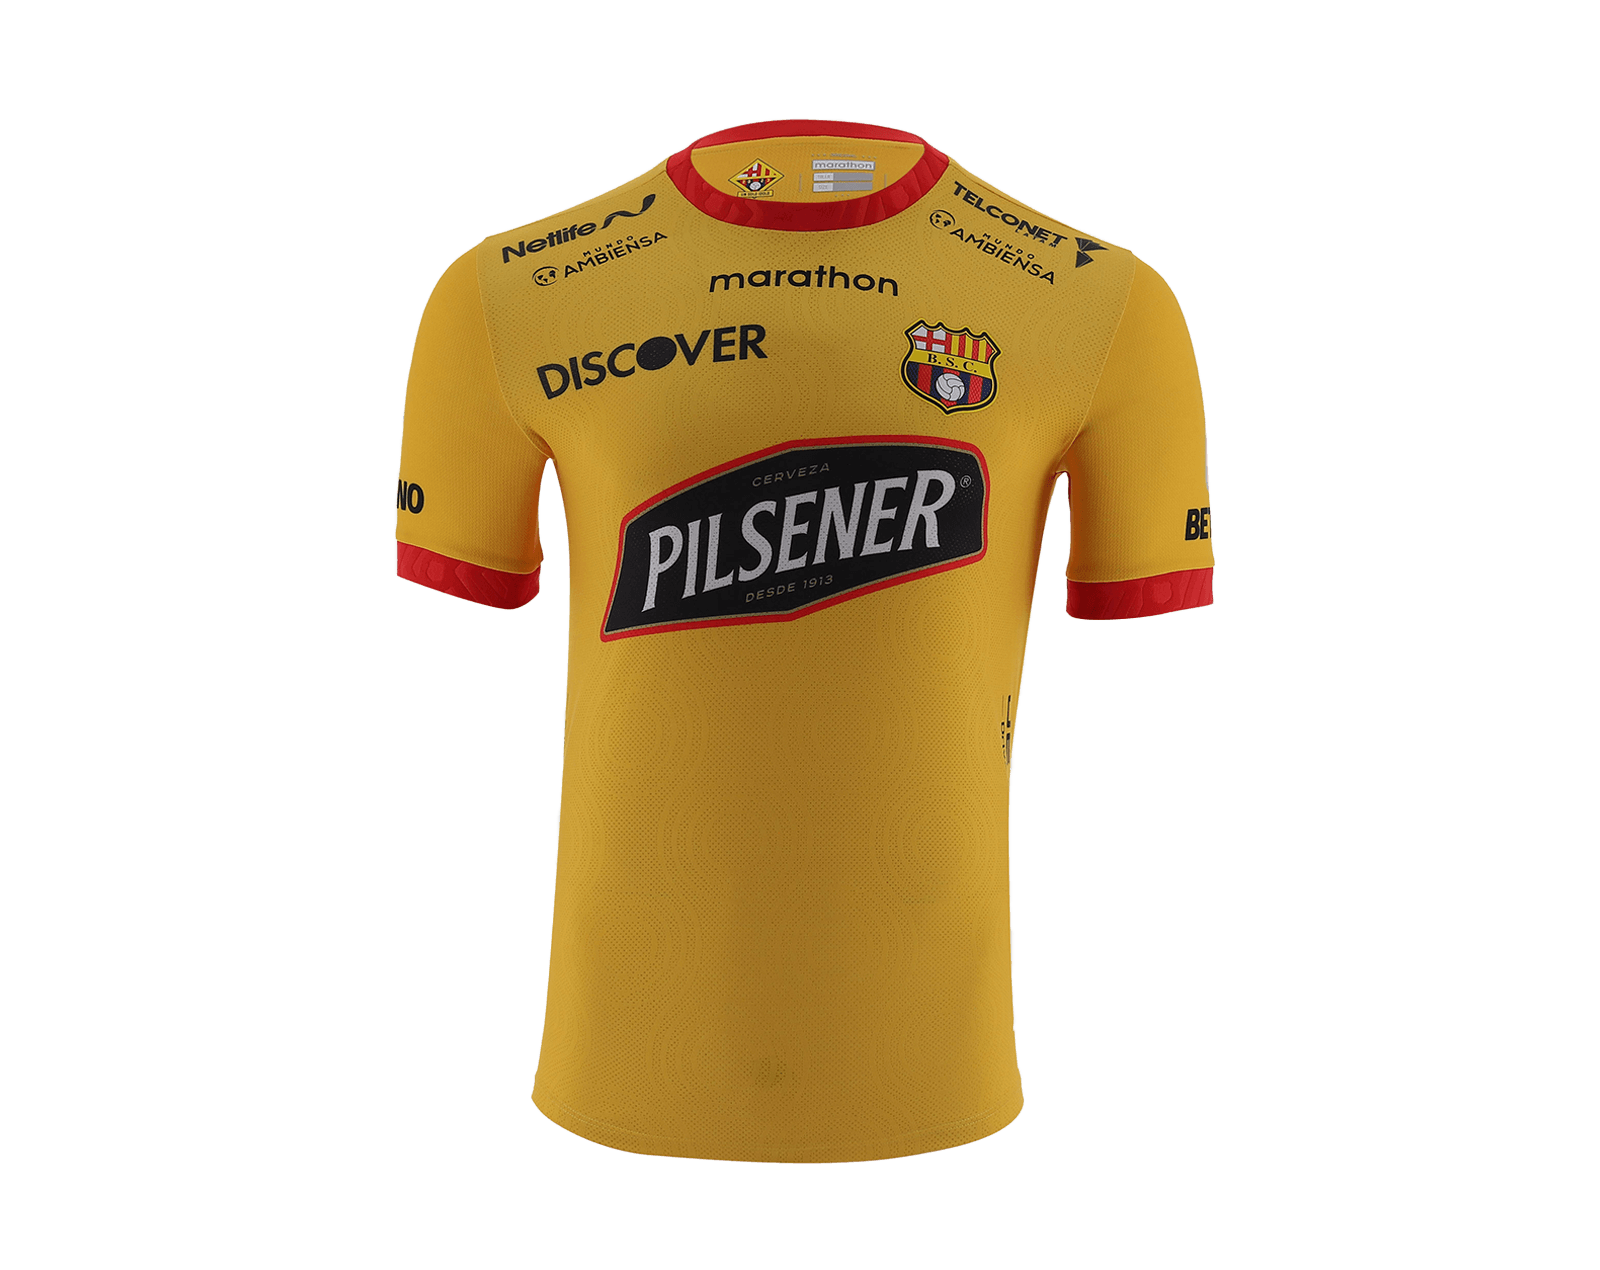 A jersey with logo of Pilsener